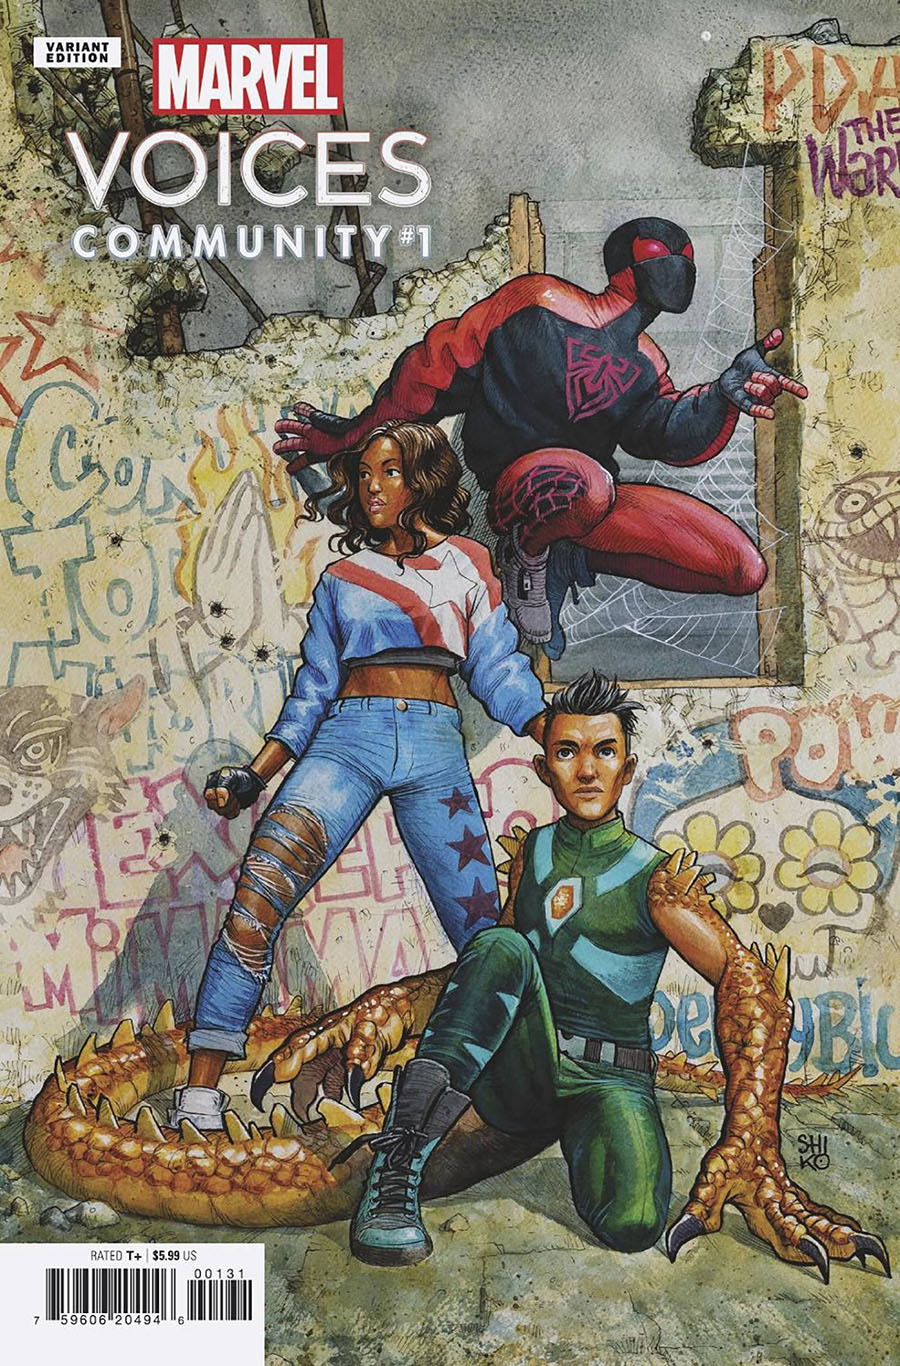 Marvels Voices Community (2022) #1 (One Shot) Cover C Variant Chiko Shiko Cover